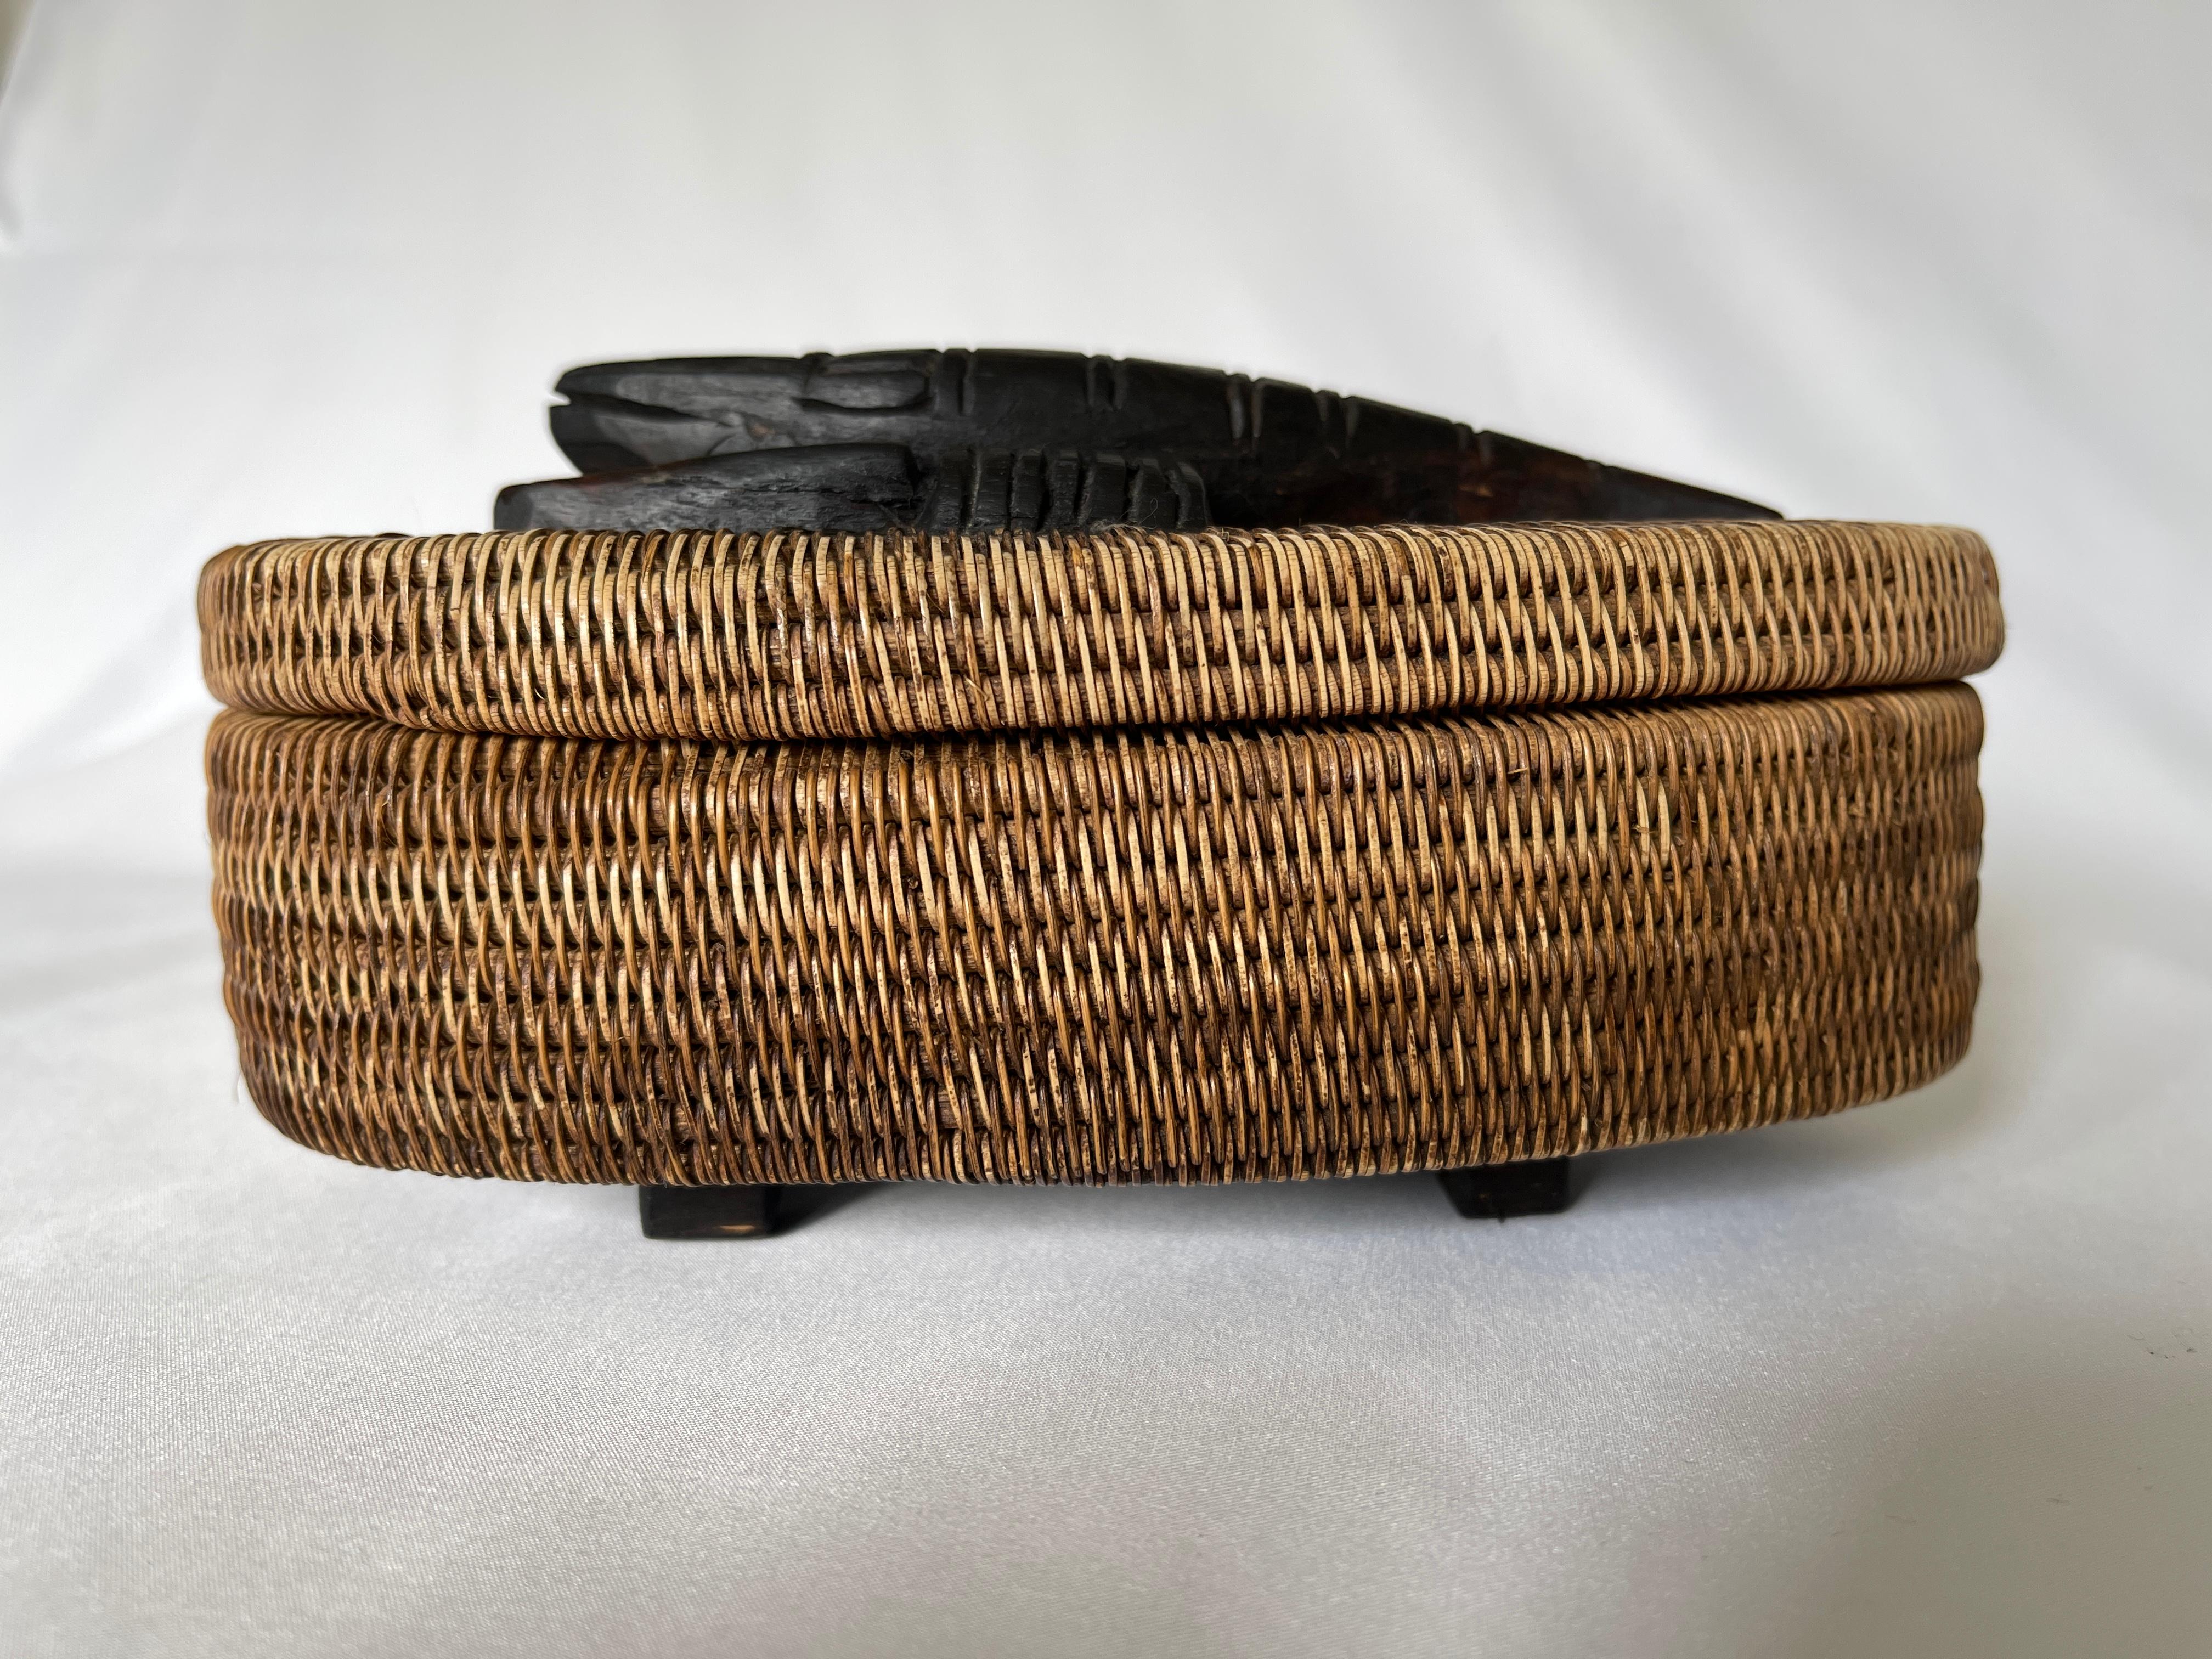 Tribal Hand Woven Oval Reed Basket with Carved Wooden Crawfish Lid